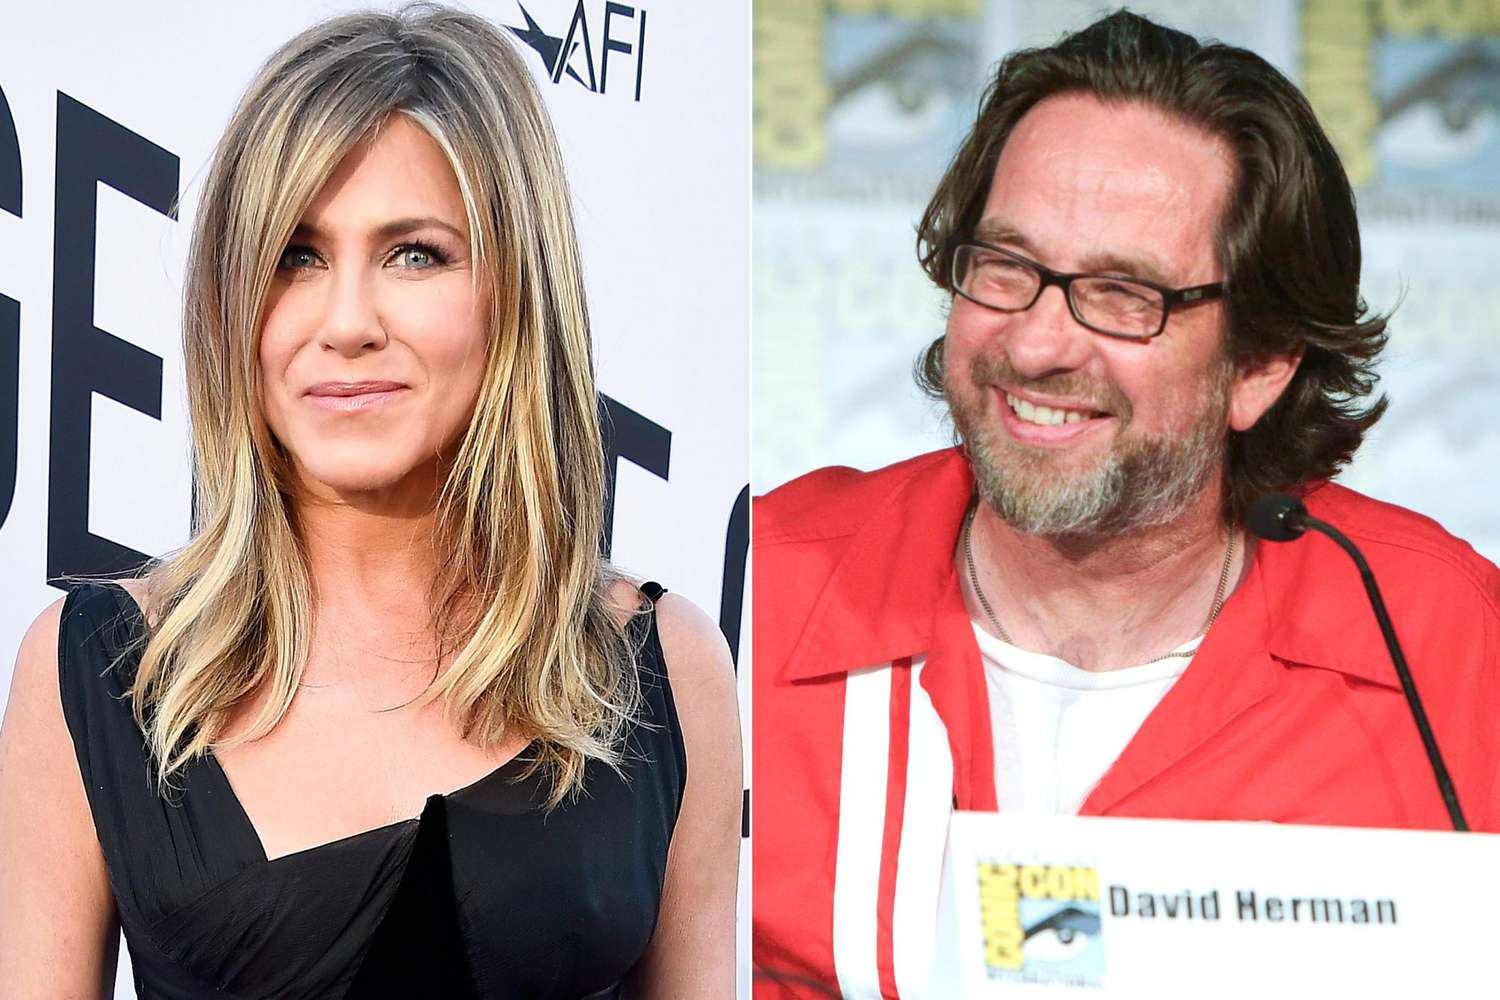 Jennifer Aniston and David Herman went to high school together